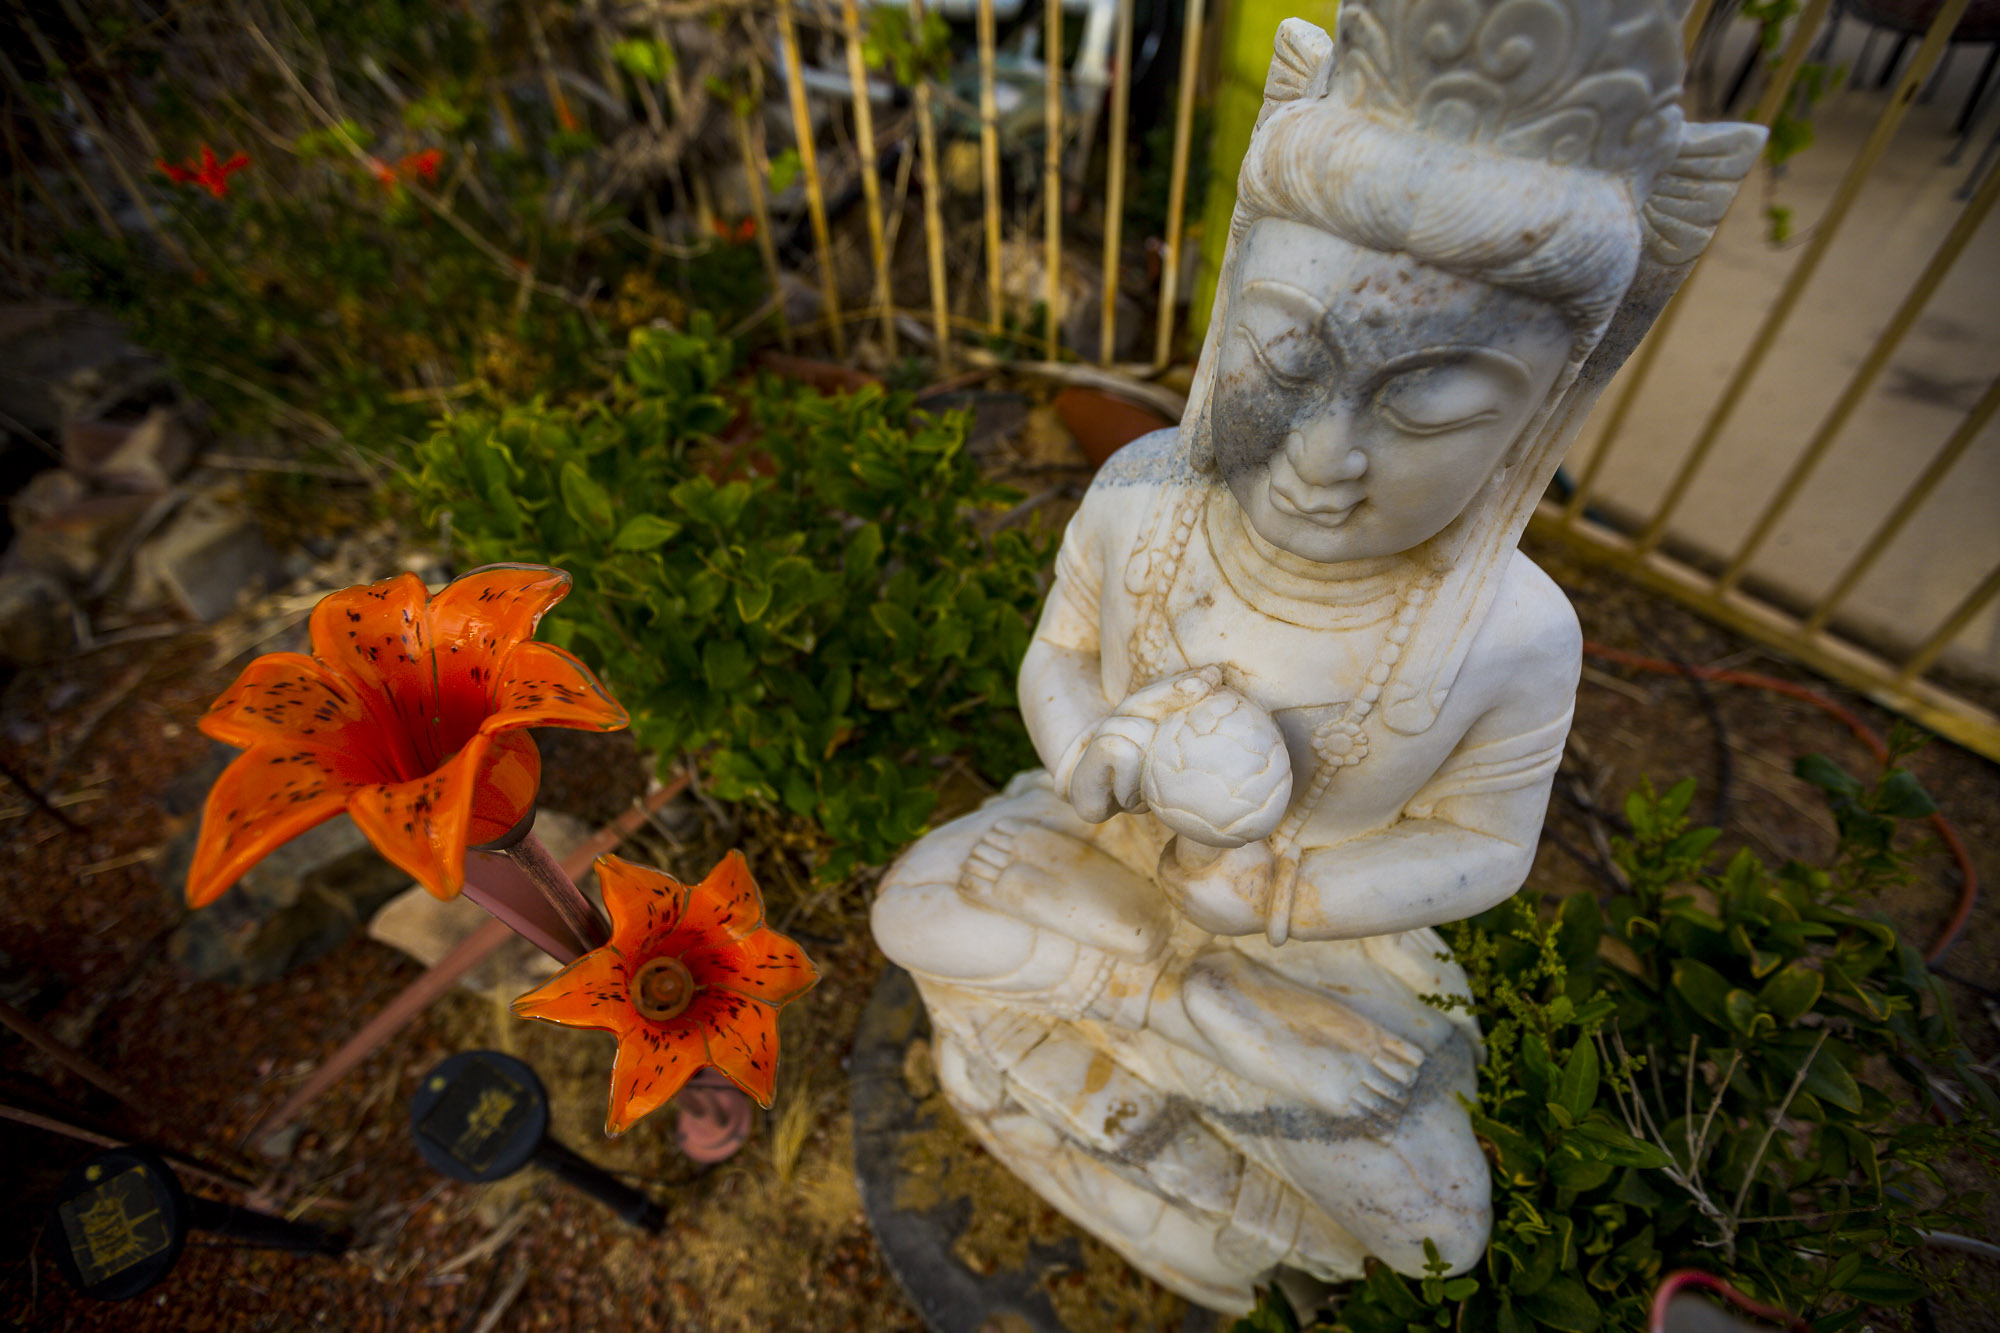 A young budda staue outside with orange solar flowers next to it. 